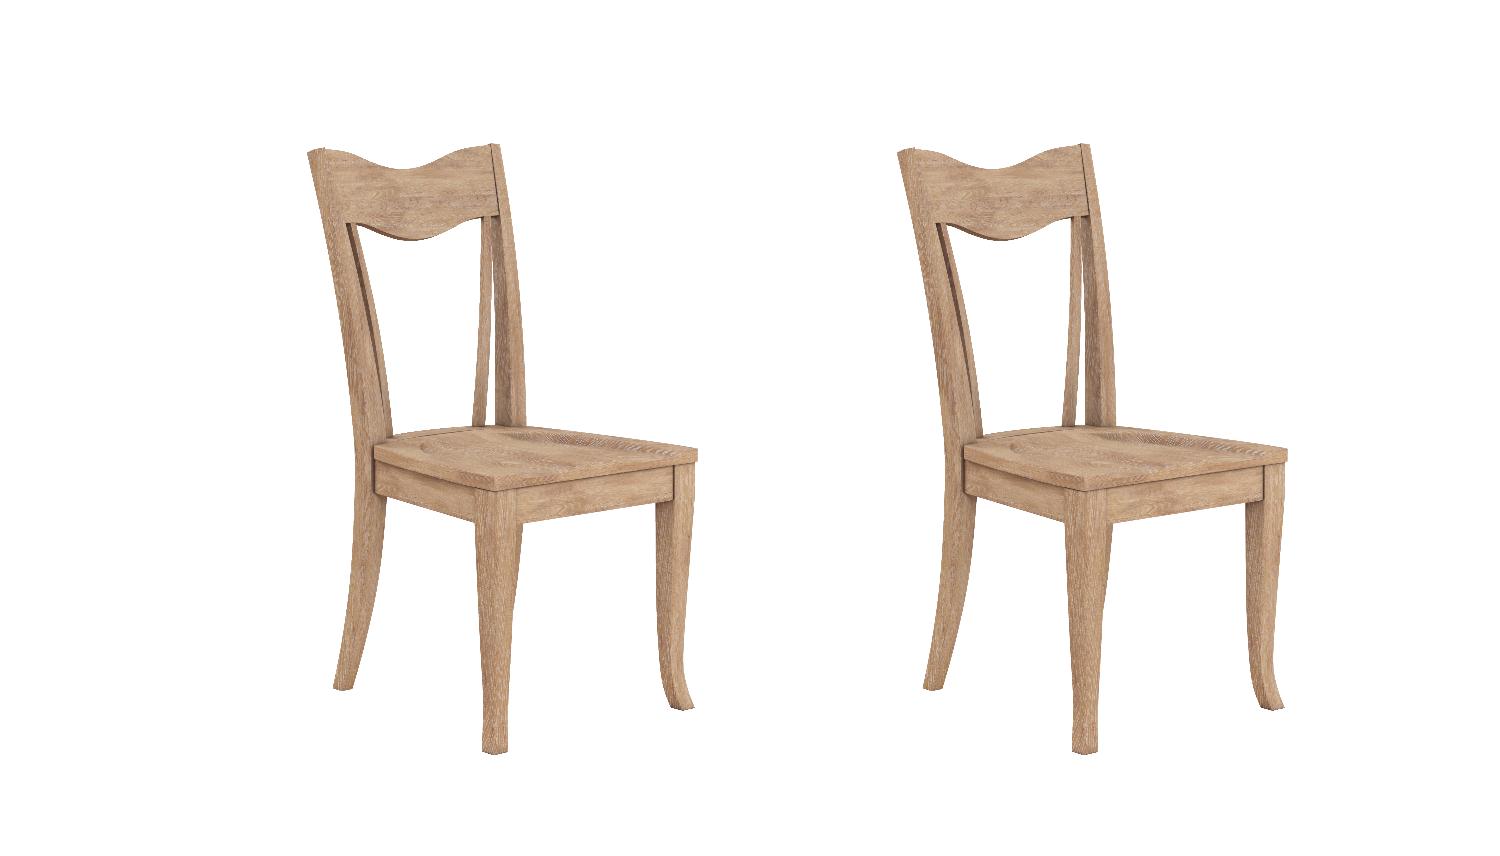 Modern, Transitional Dining Chair Set Post 288206-2355-2pcs in Oak 